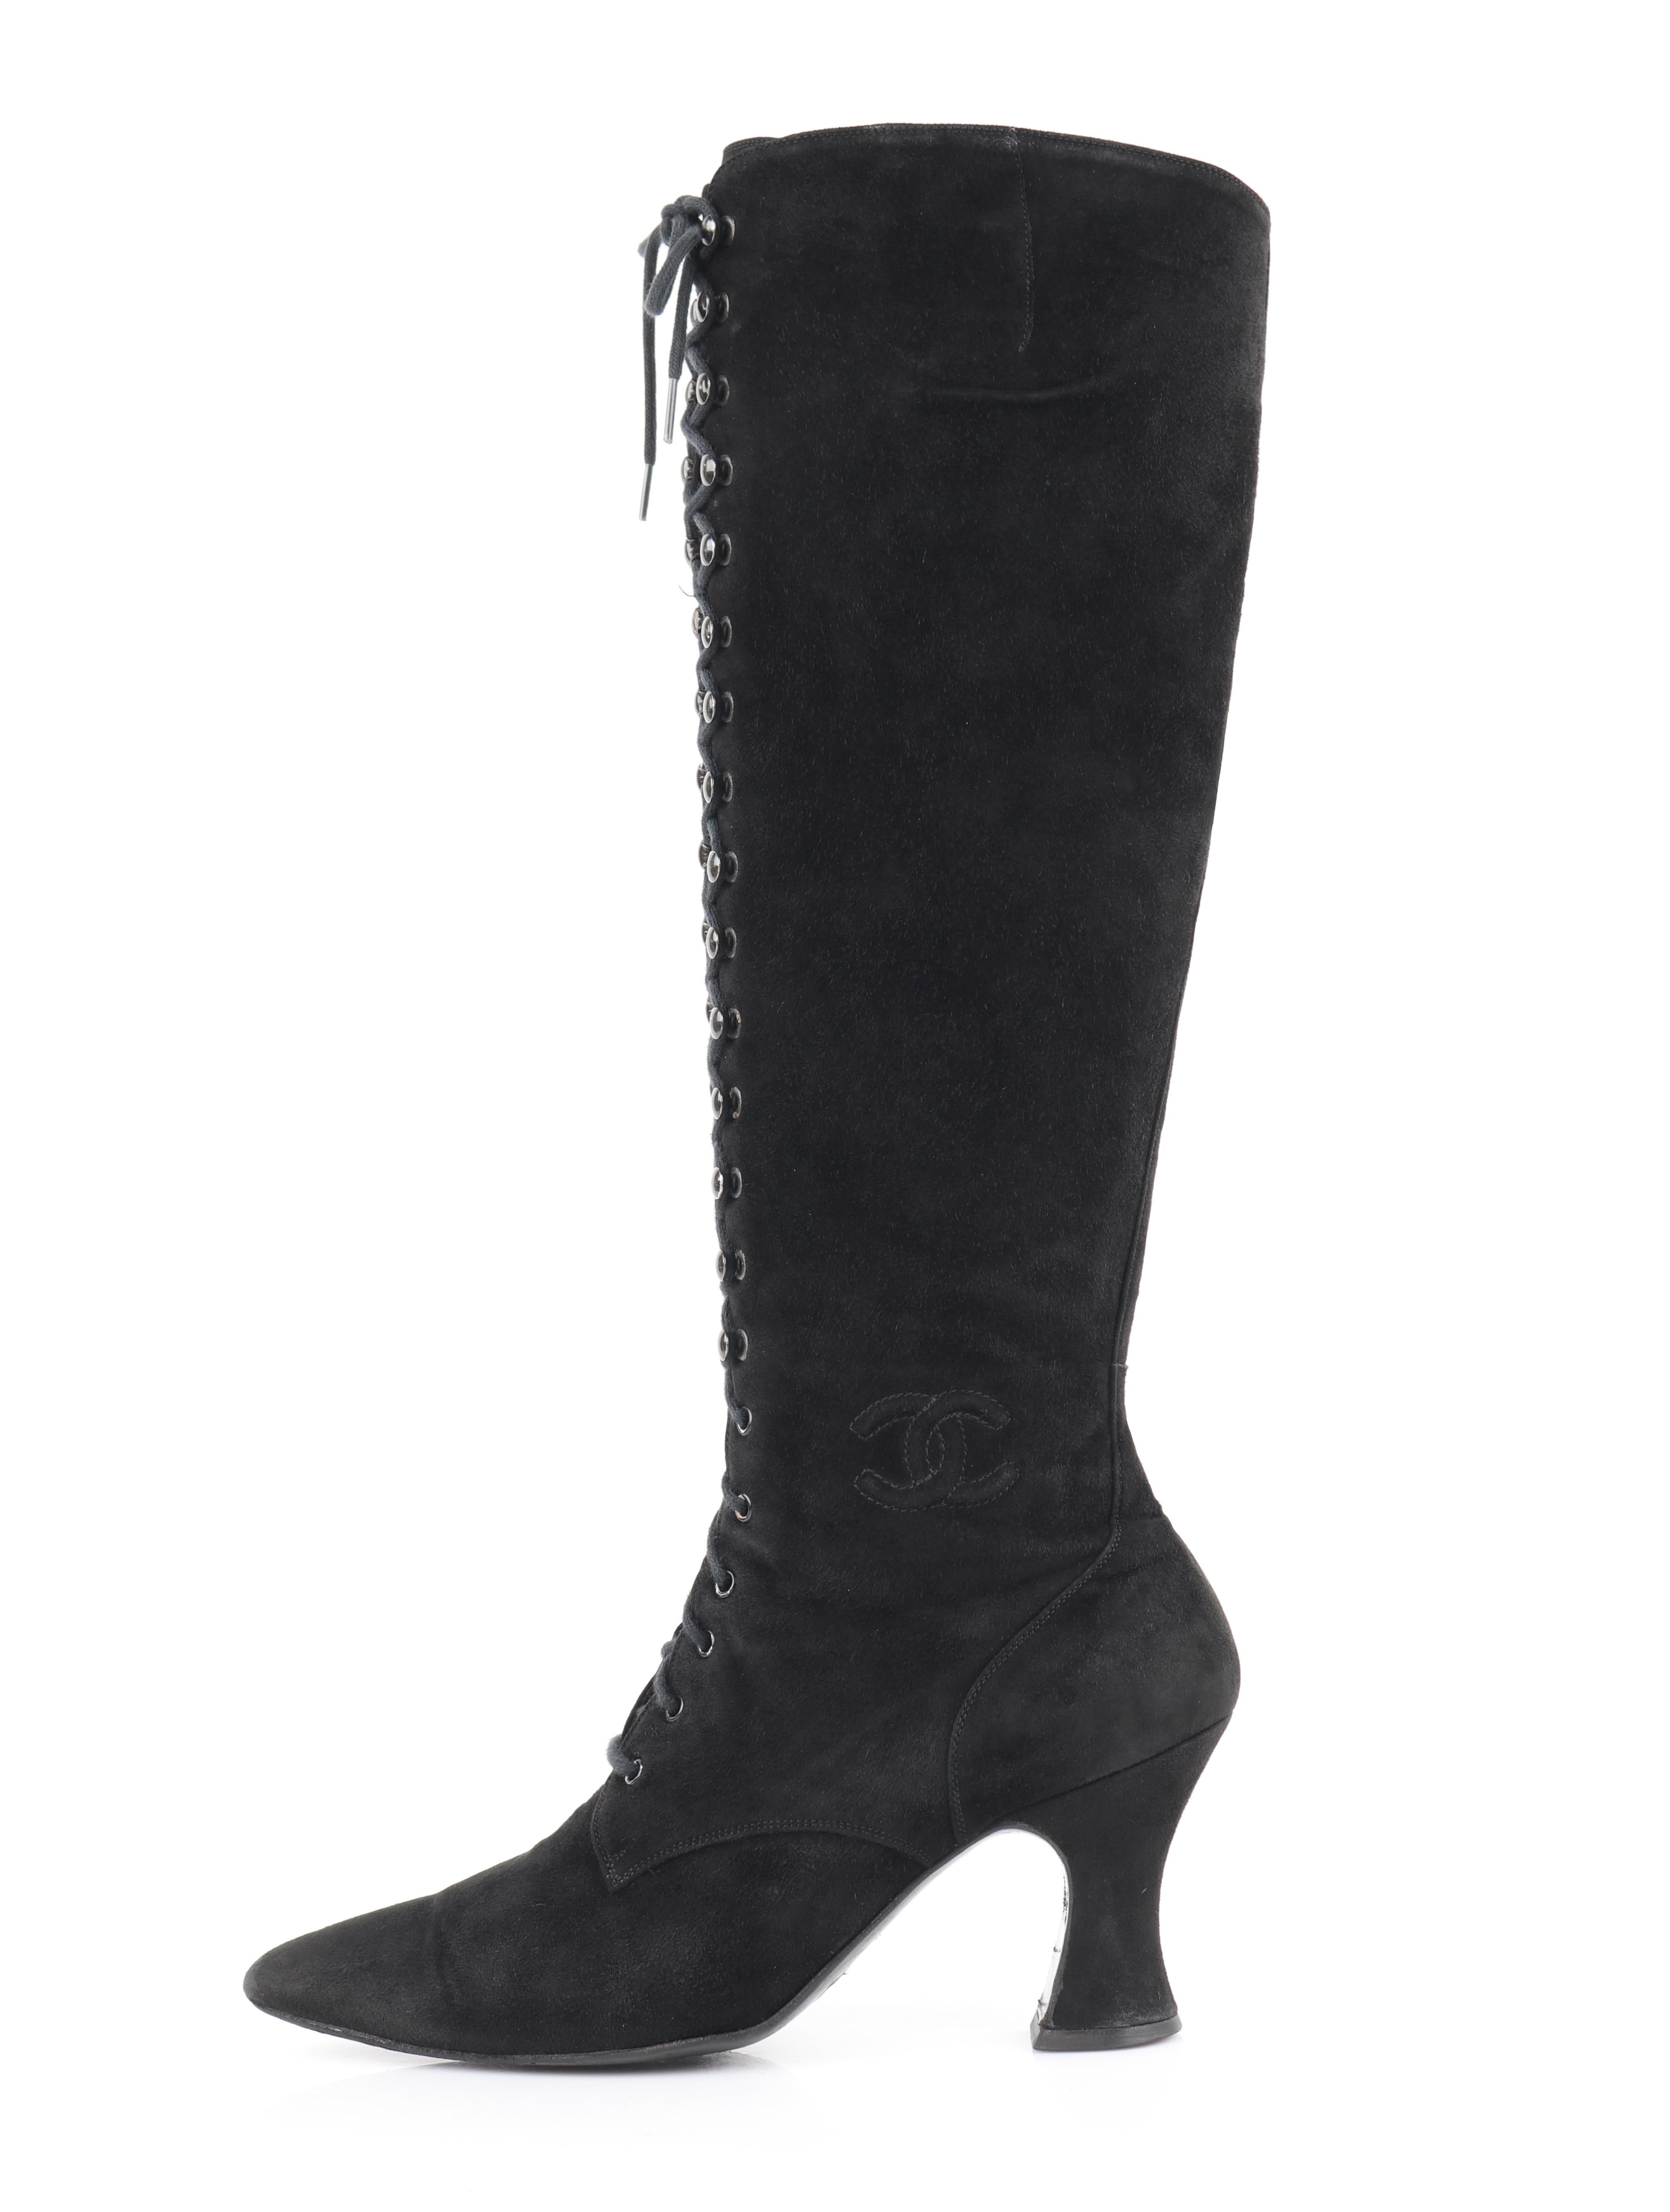 victorian knee high boots